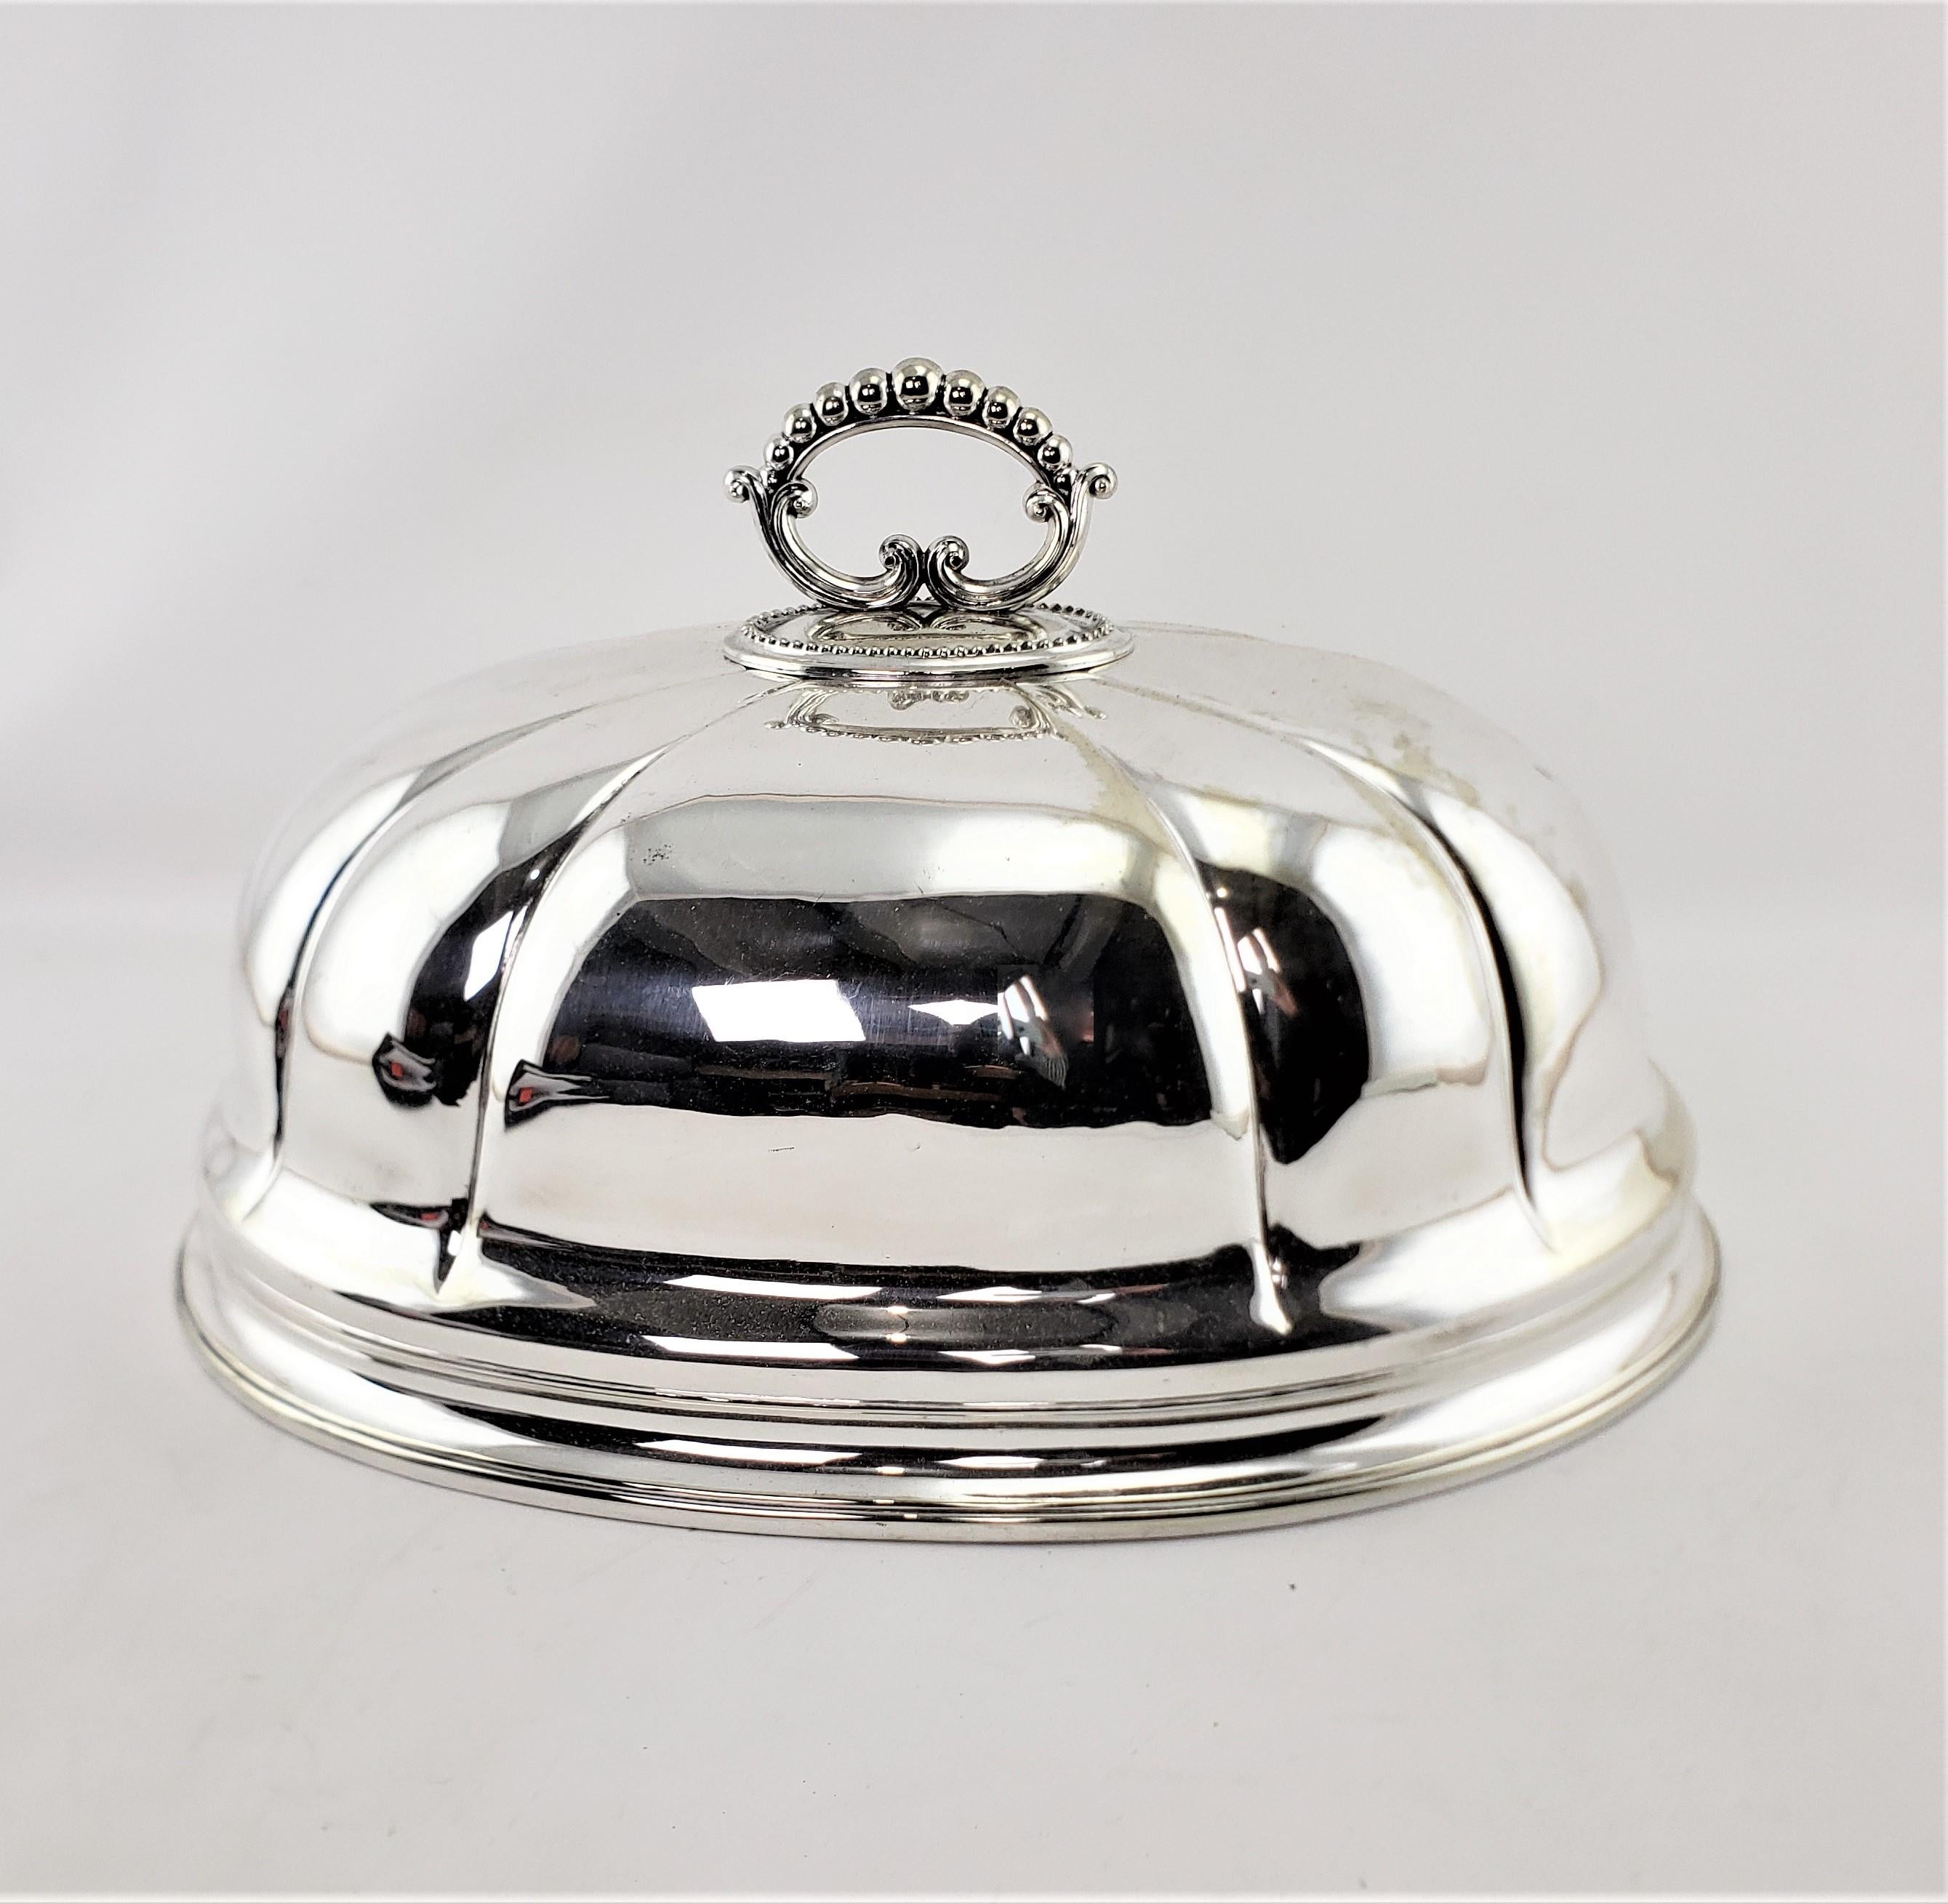 This large silver plated meat dome is unsigned, but presumed to have originated from England and dates to approximately 1900 and done in a period Edwardian style. The sides of the dome are done with a scalloped motif with a banding around the bottom